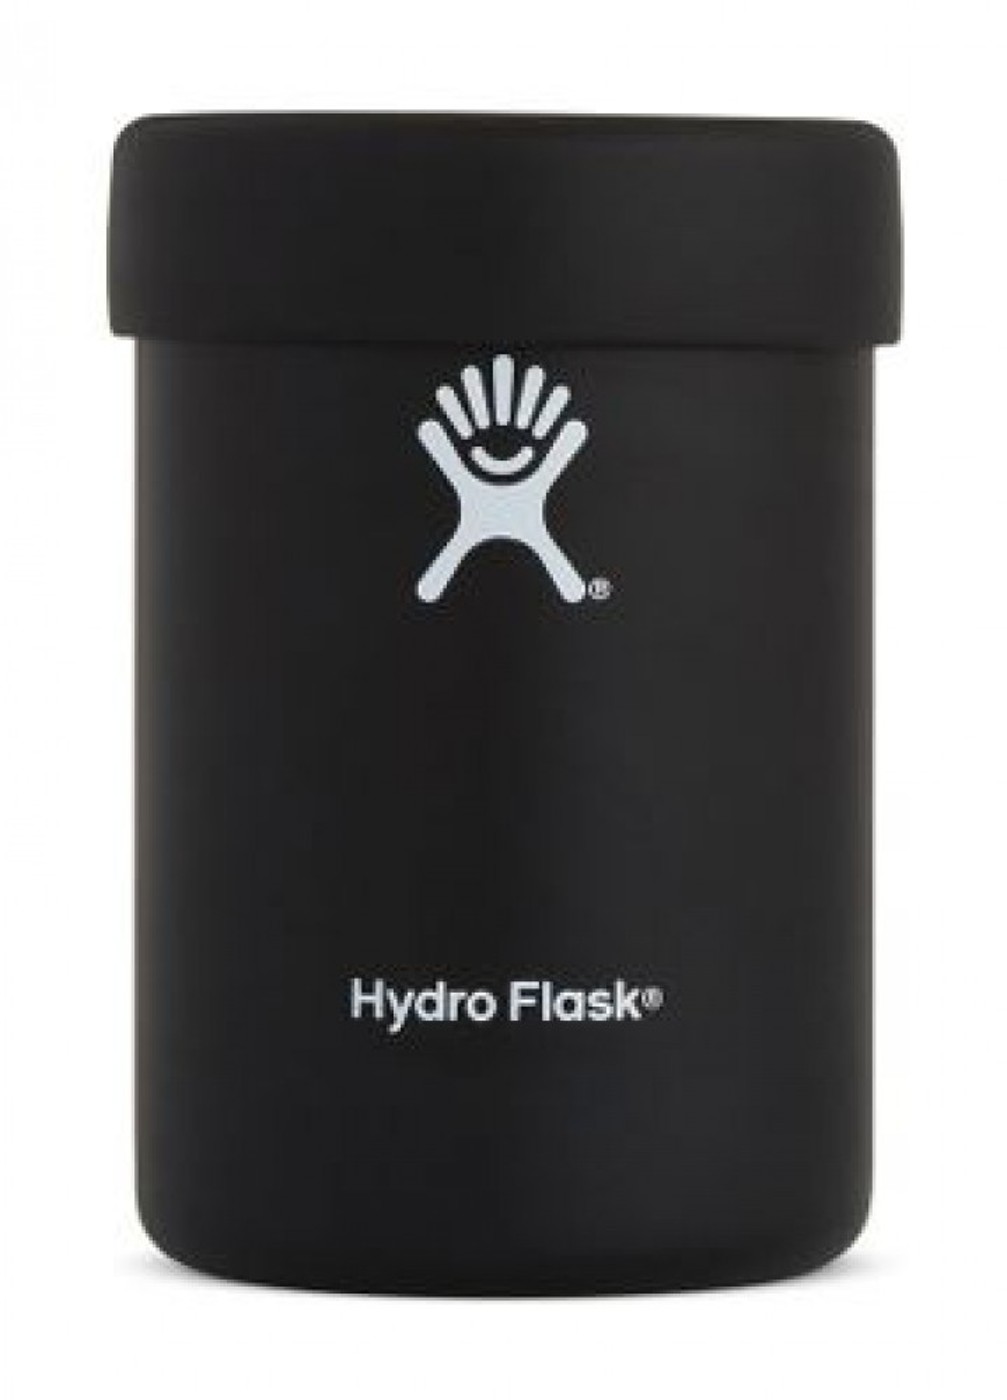 HYDRO FLASK Spirits 12 OZ Cooler Cup